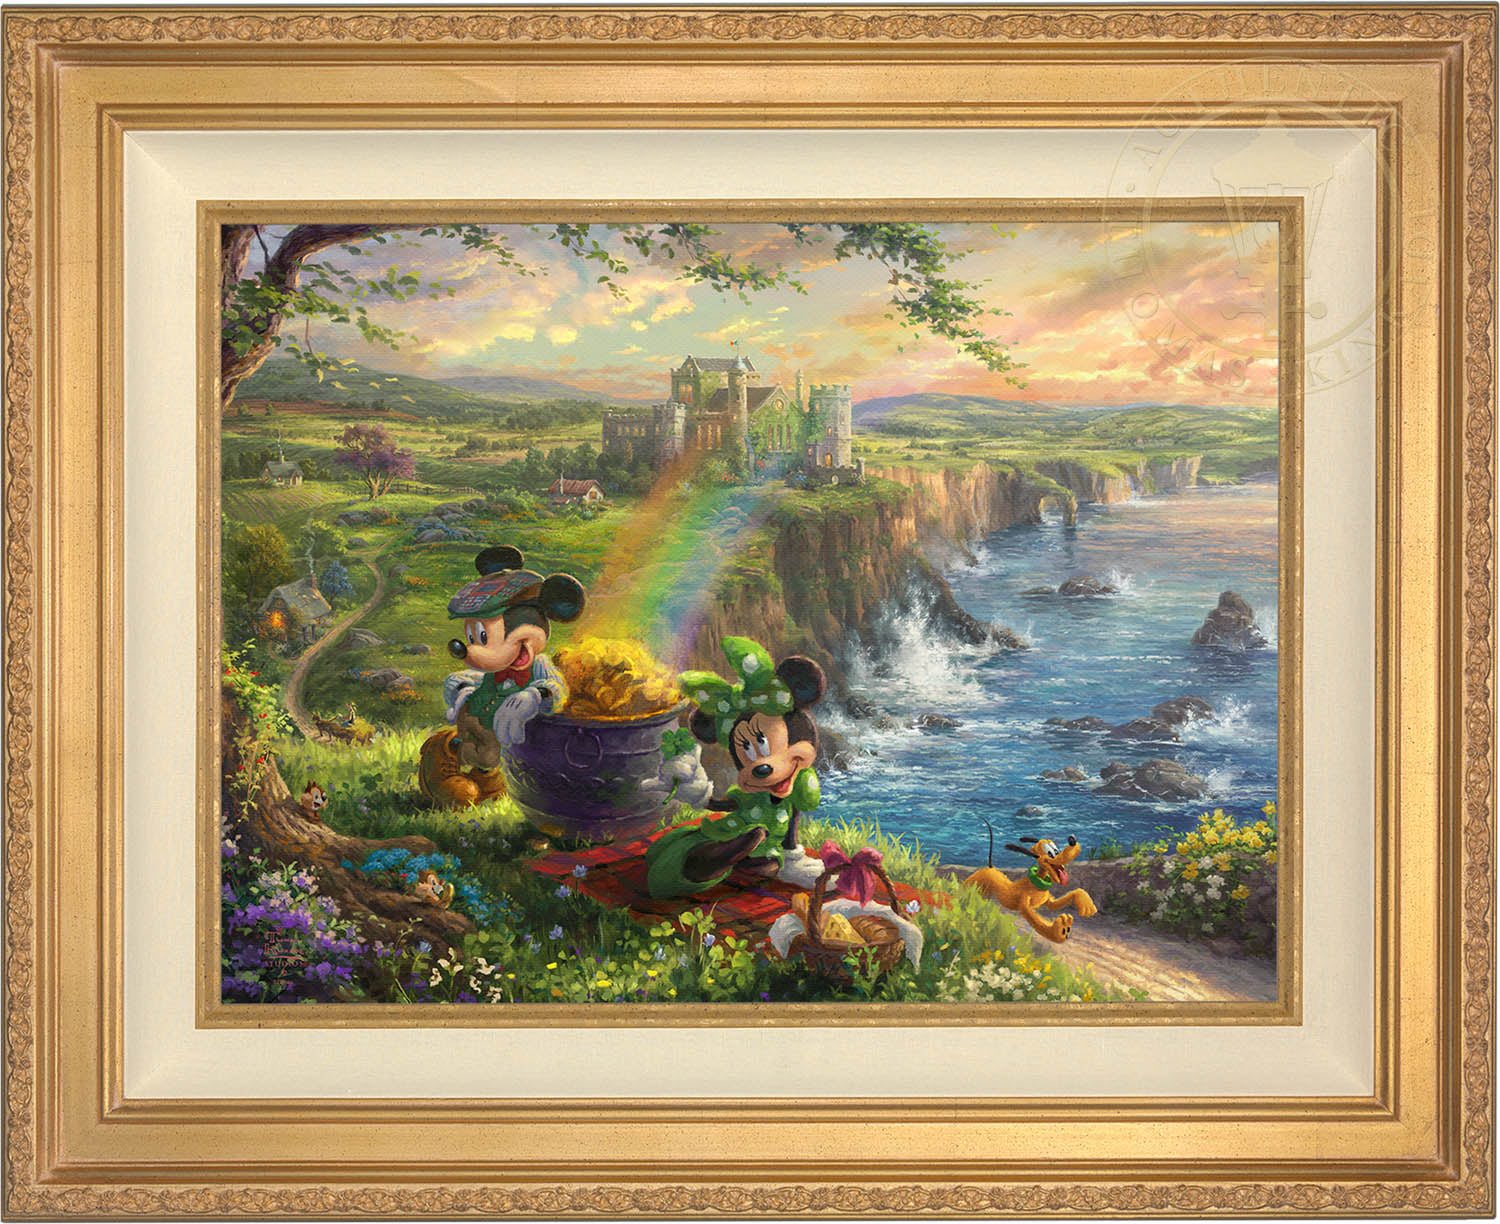 Dressed in the Irish's traditional color, Mickey and Minnie seem to have luck on their side.  Antique Gold Frame